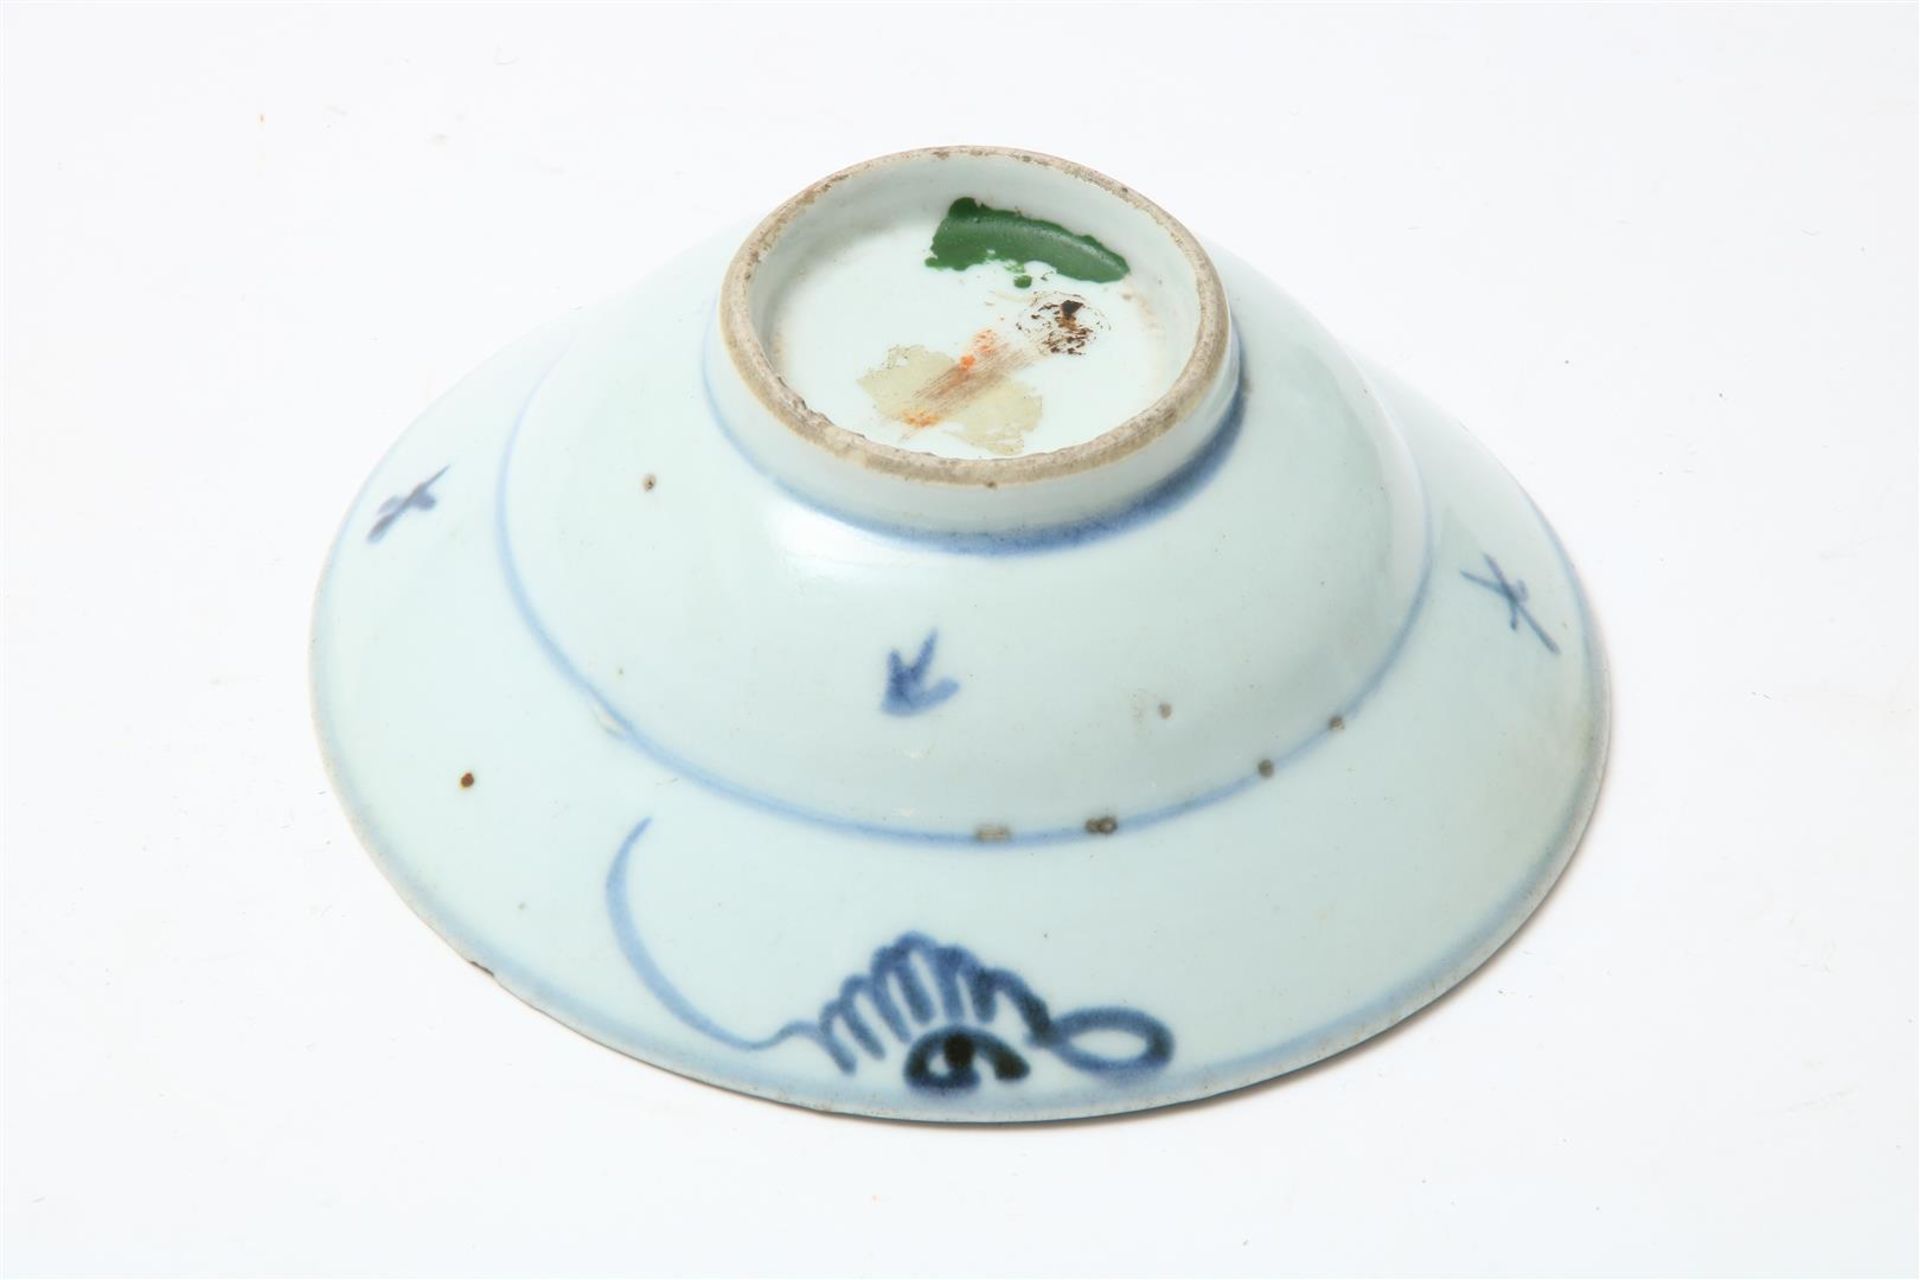 Lot of 5 porcelain dishes (edge flakes) and 4 various saucers, including The Nanking Cargo and Ming, - Image 14 of 19